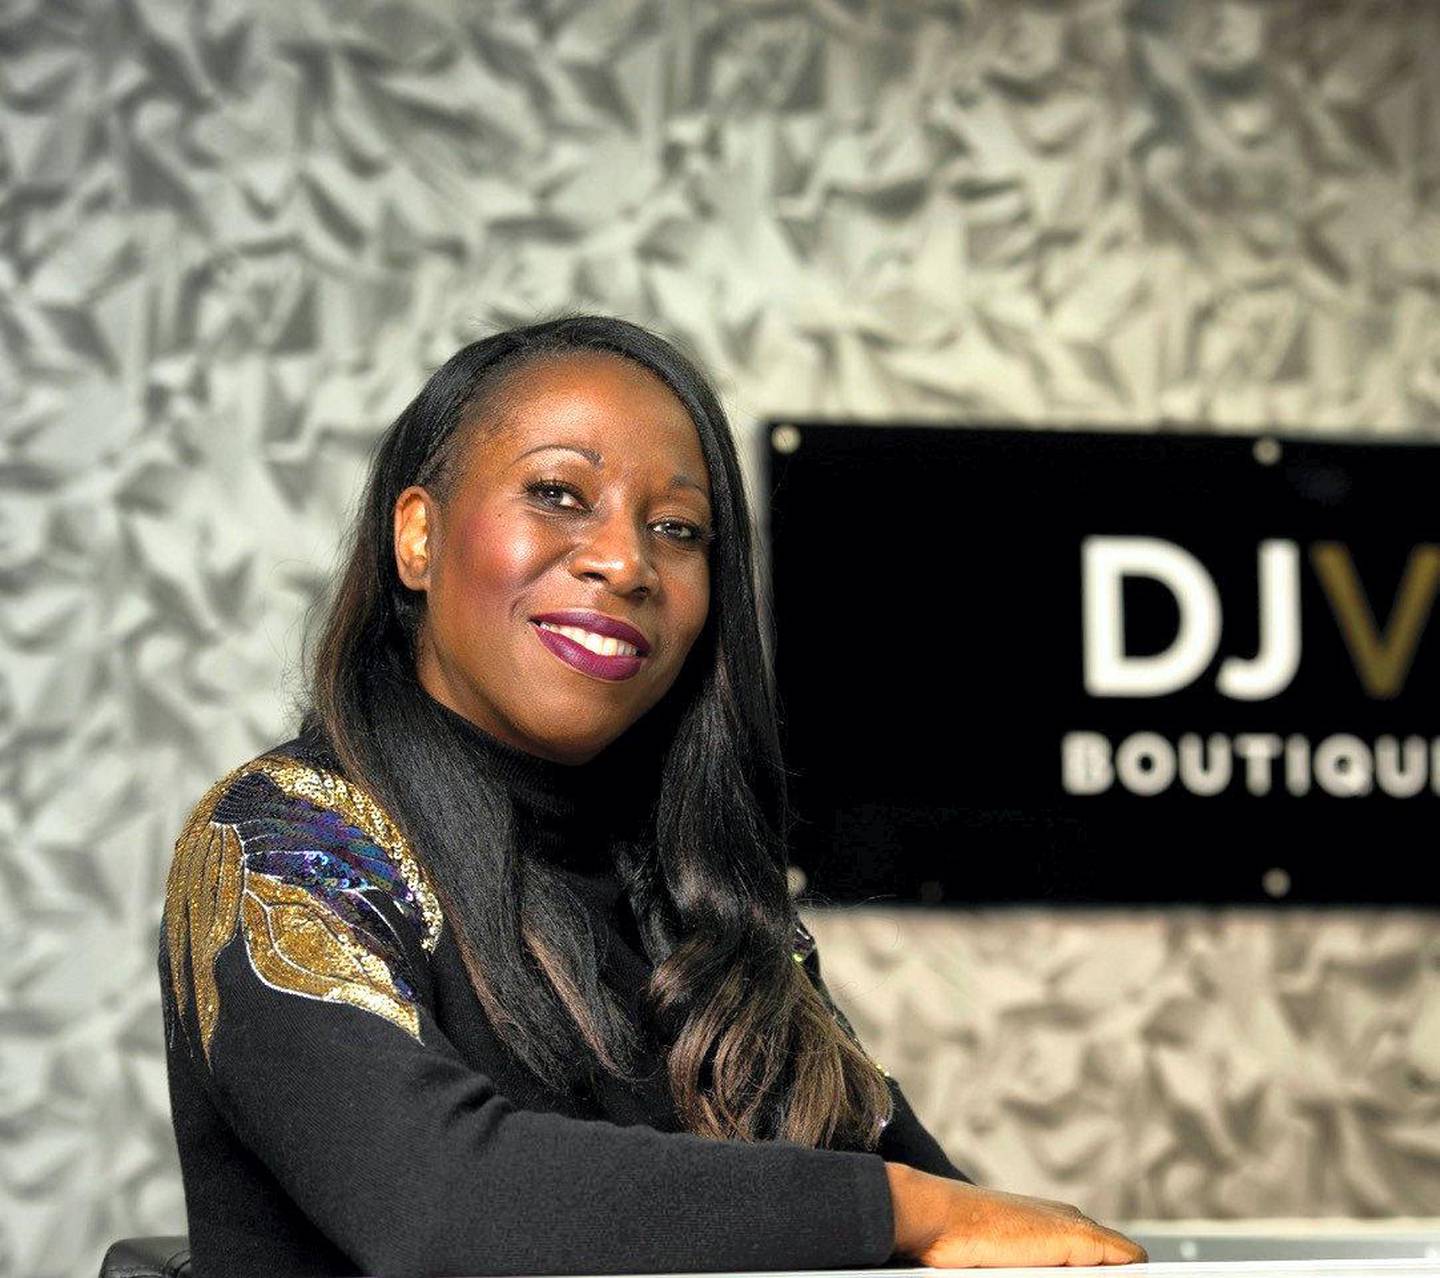 Mandy Errington, owner of DJV Boutique in Ipswich, Suffolk, has upgraded her online offering to boost sales while her store is closed. Courtesy DJV Boutique